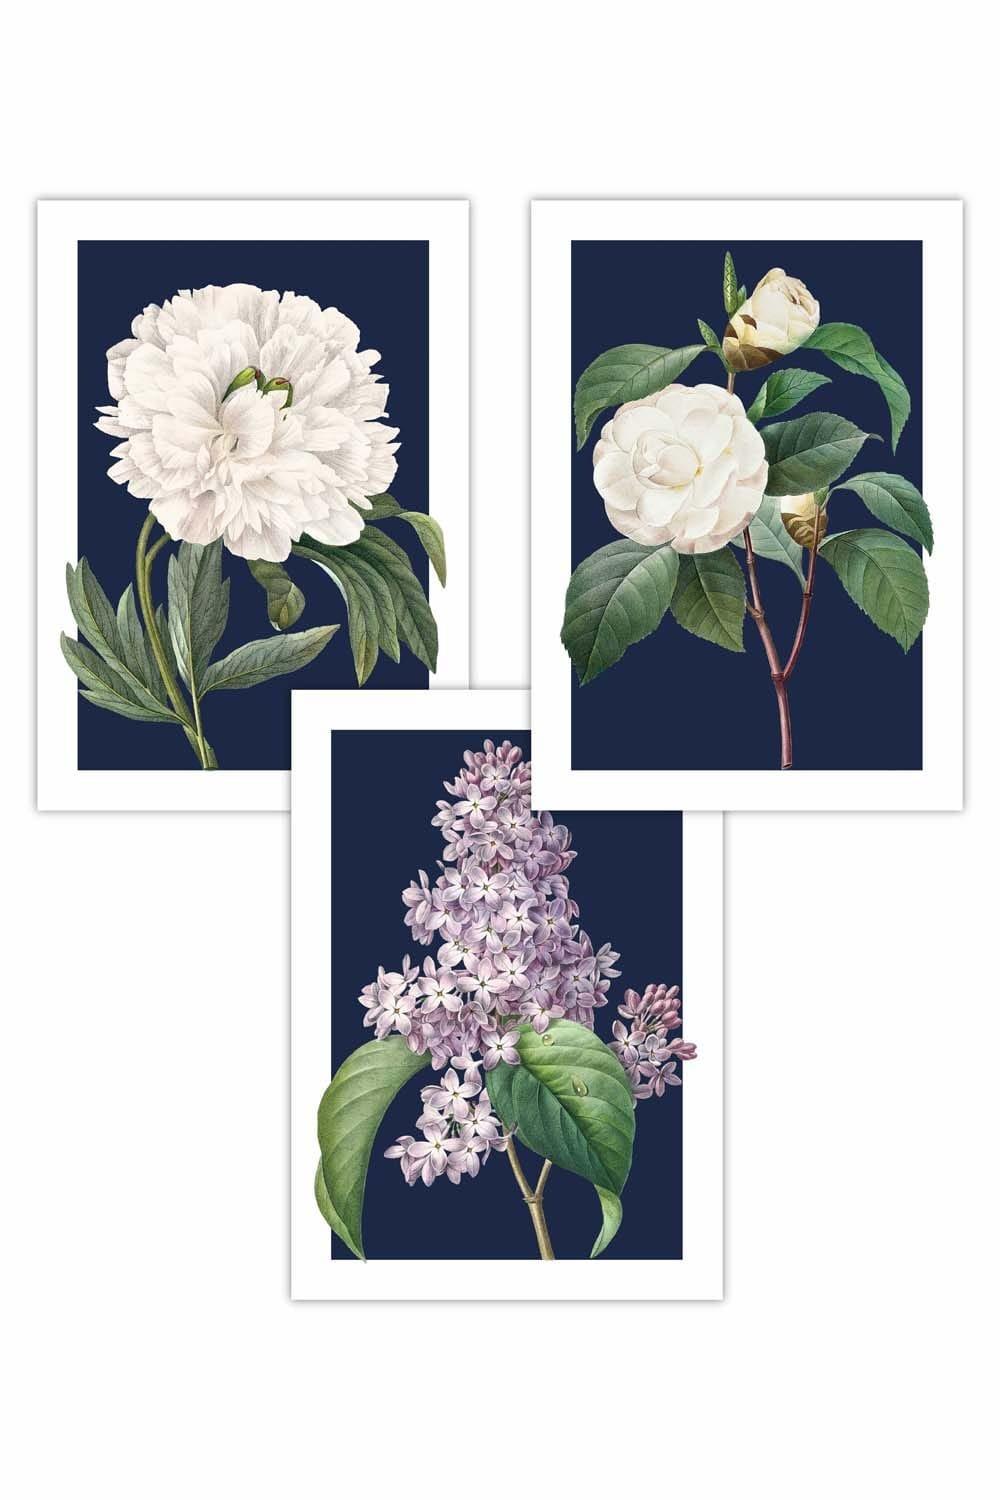 Set of 3 Vintage Flowers Lilac, Peony and Camellia on Navy Blue Art Posters